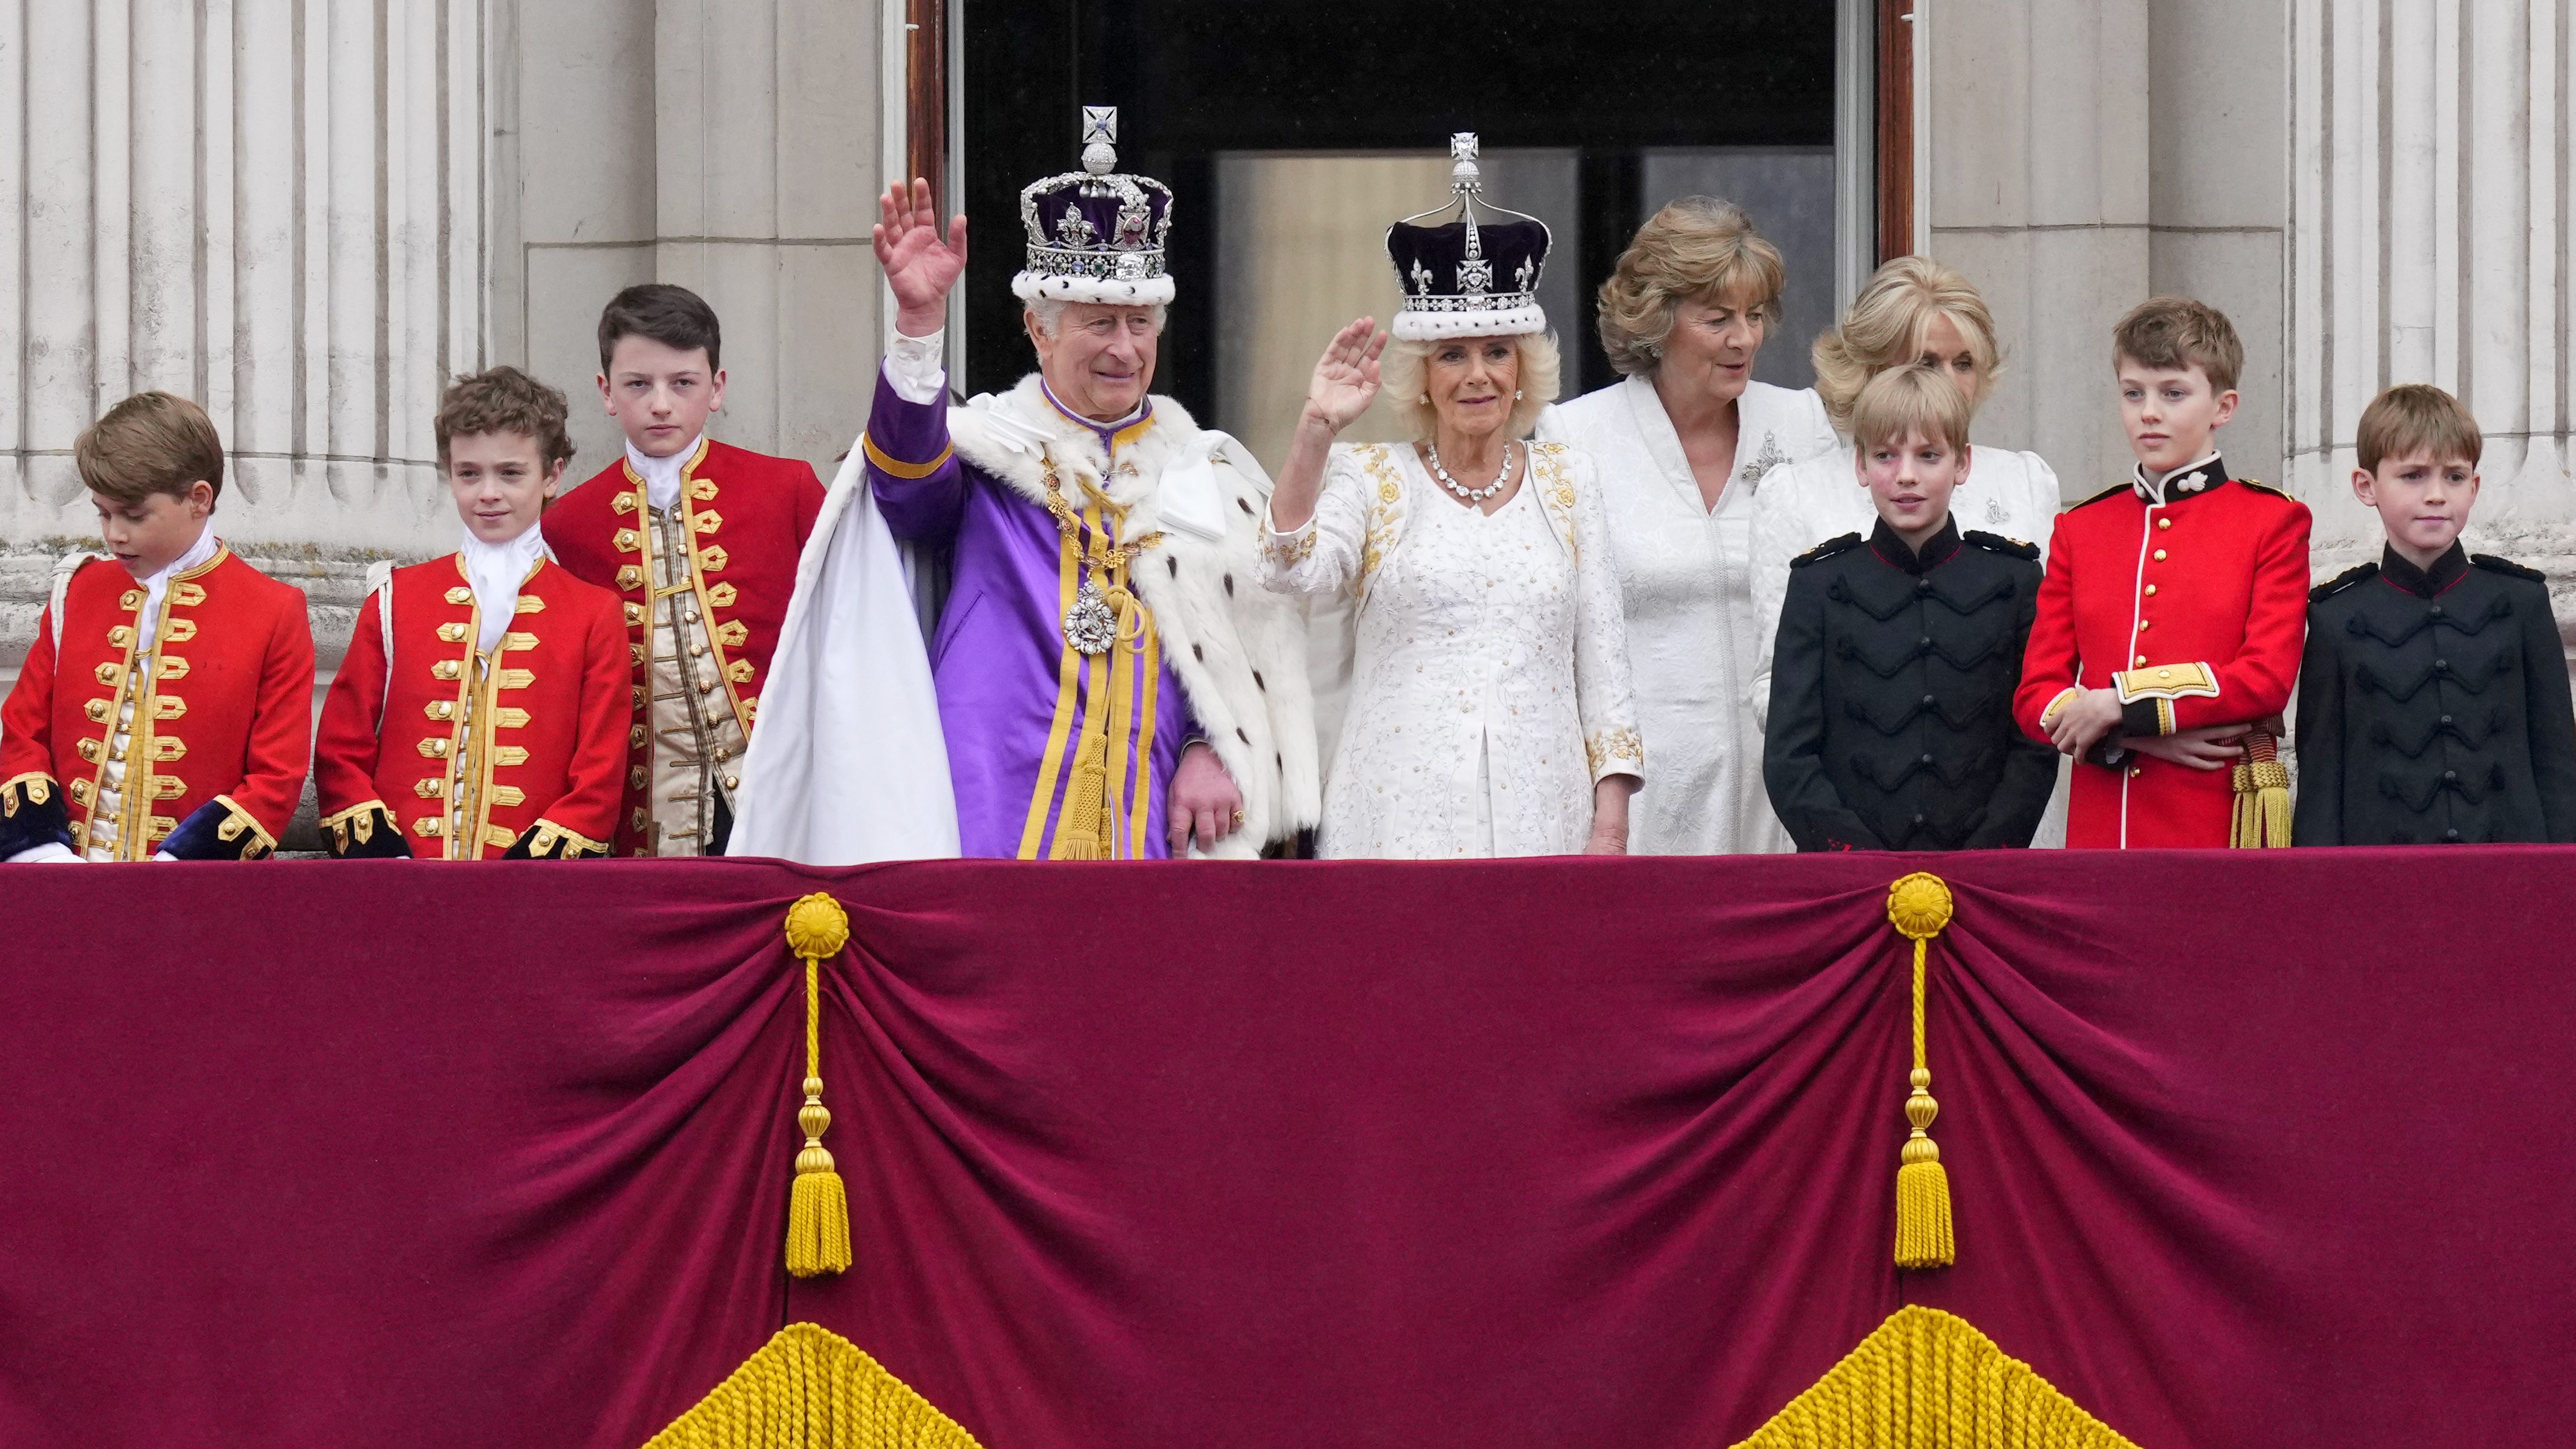 King Charles III's coronation in 2023 comes amid growing tensions in UK  royal family